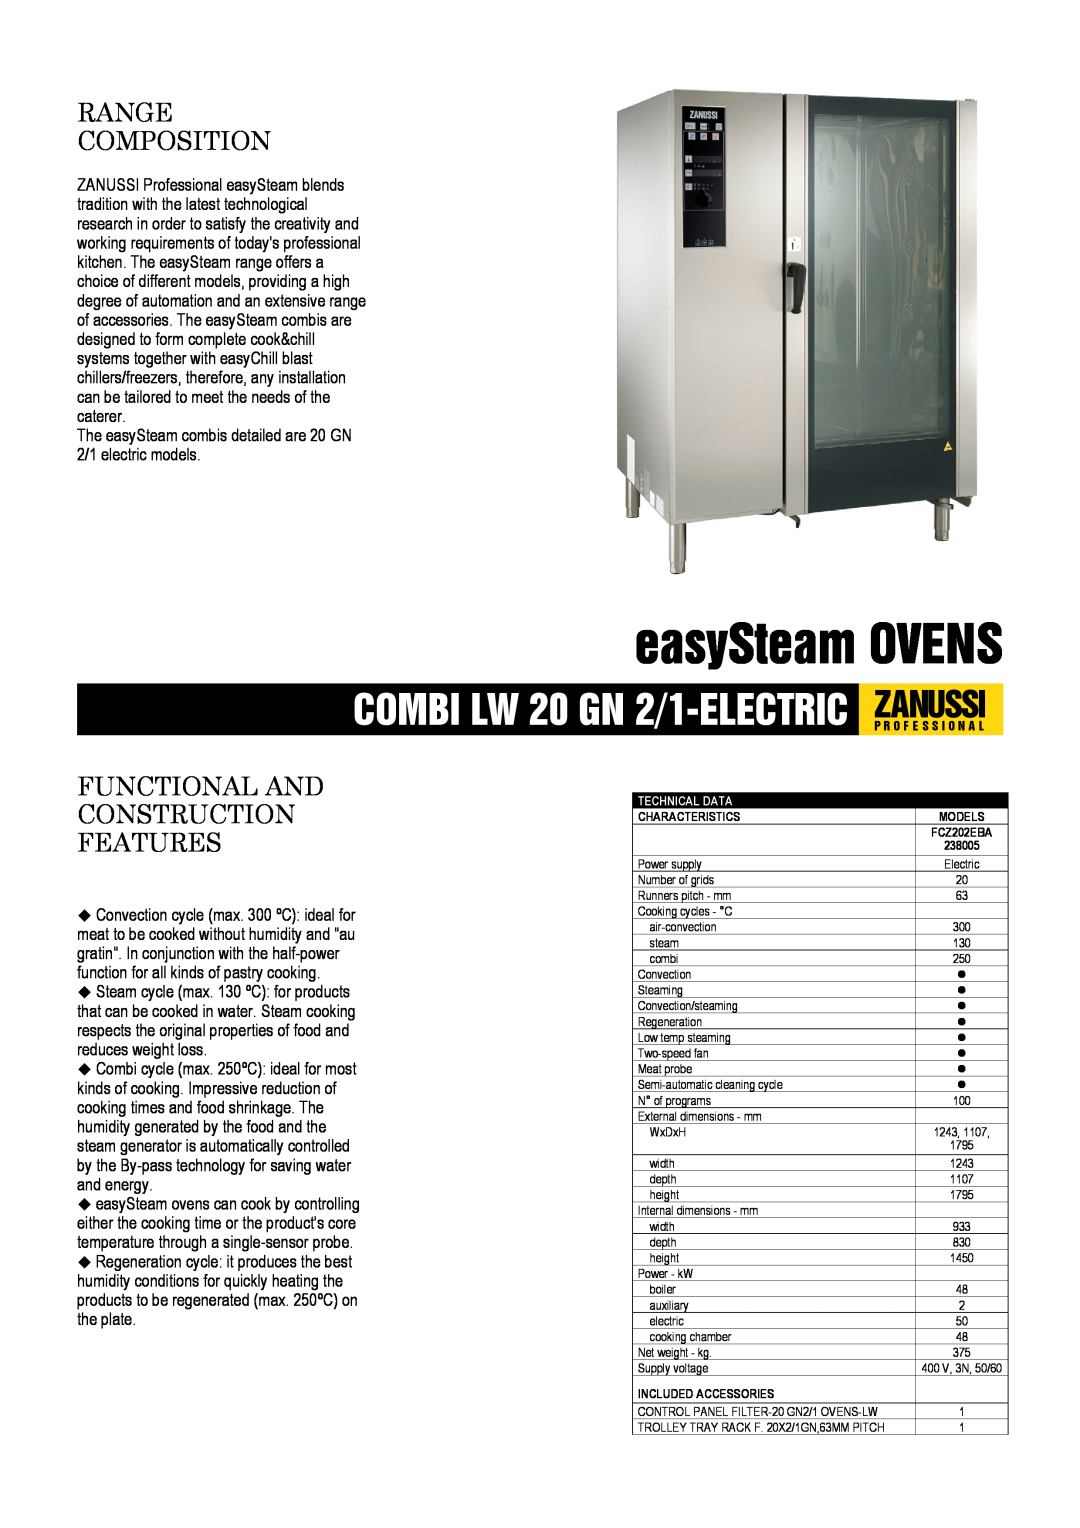 Zanussi 238005, FCZ202EBA dimensions easySteam OVENS, Range Composition, Functional And Construction Features 